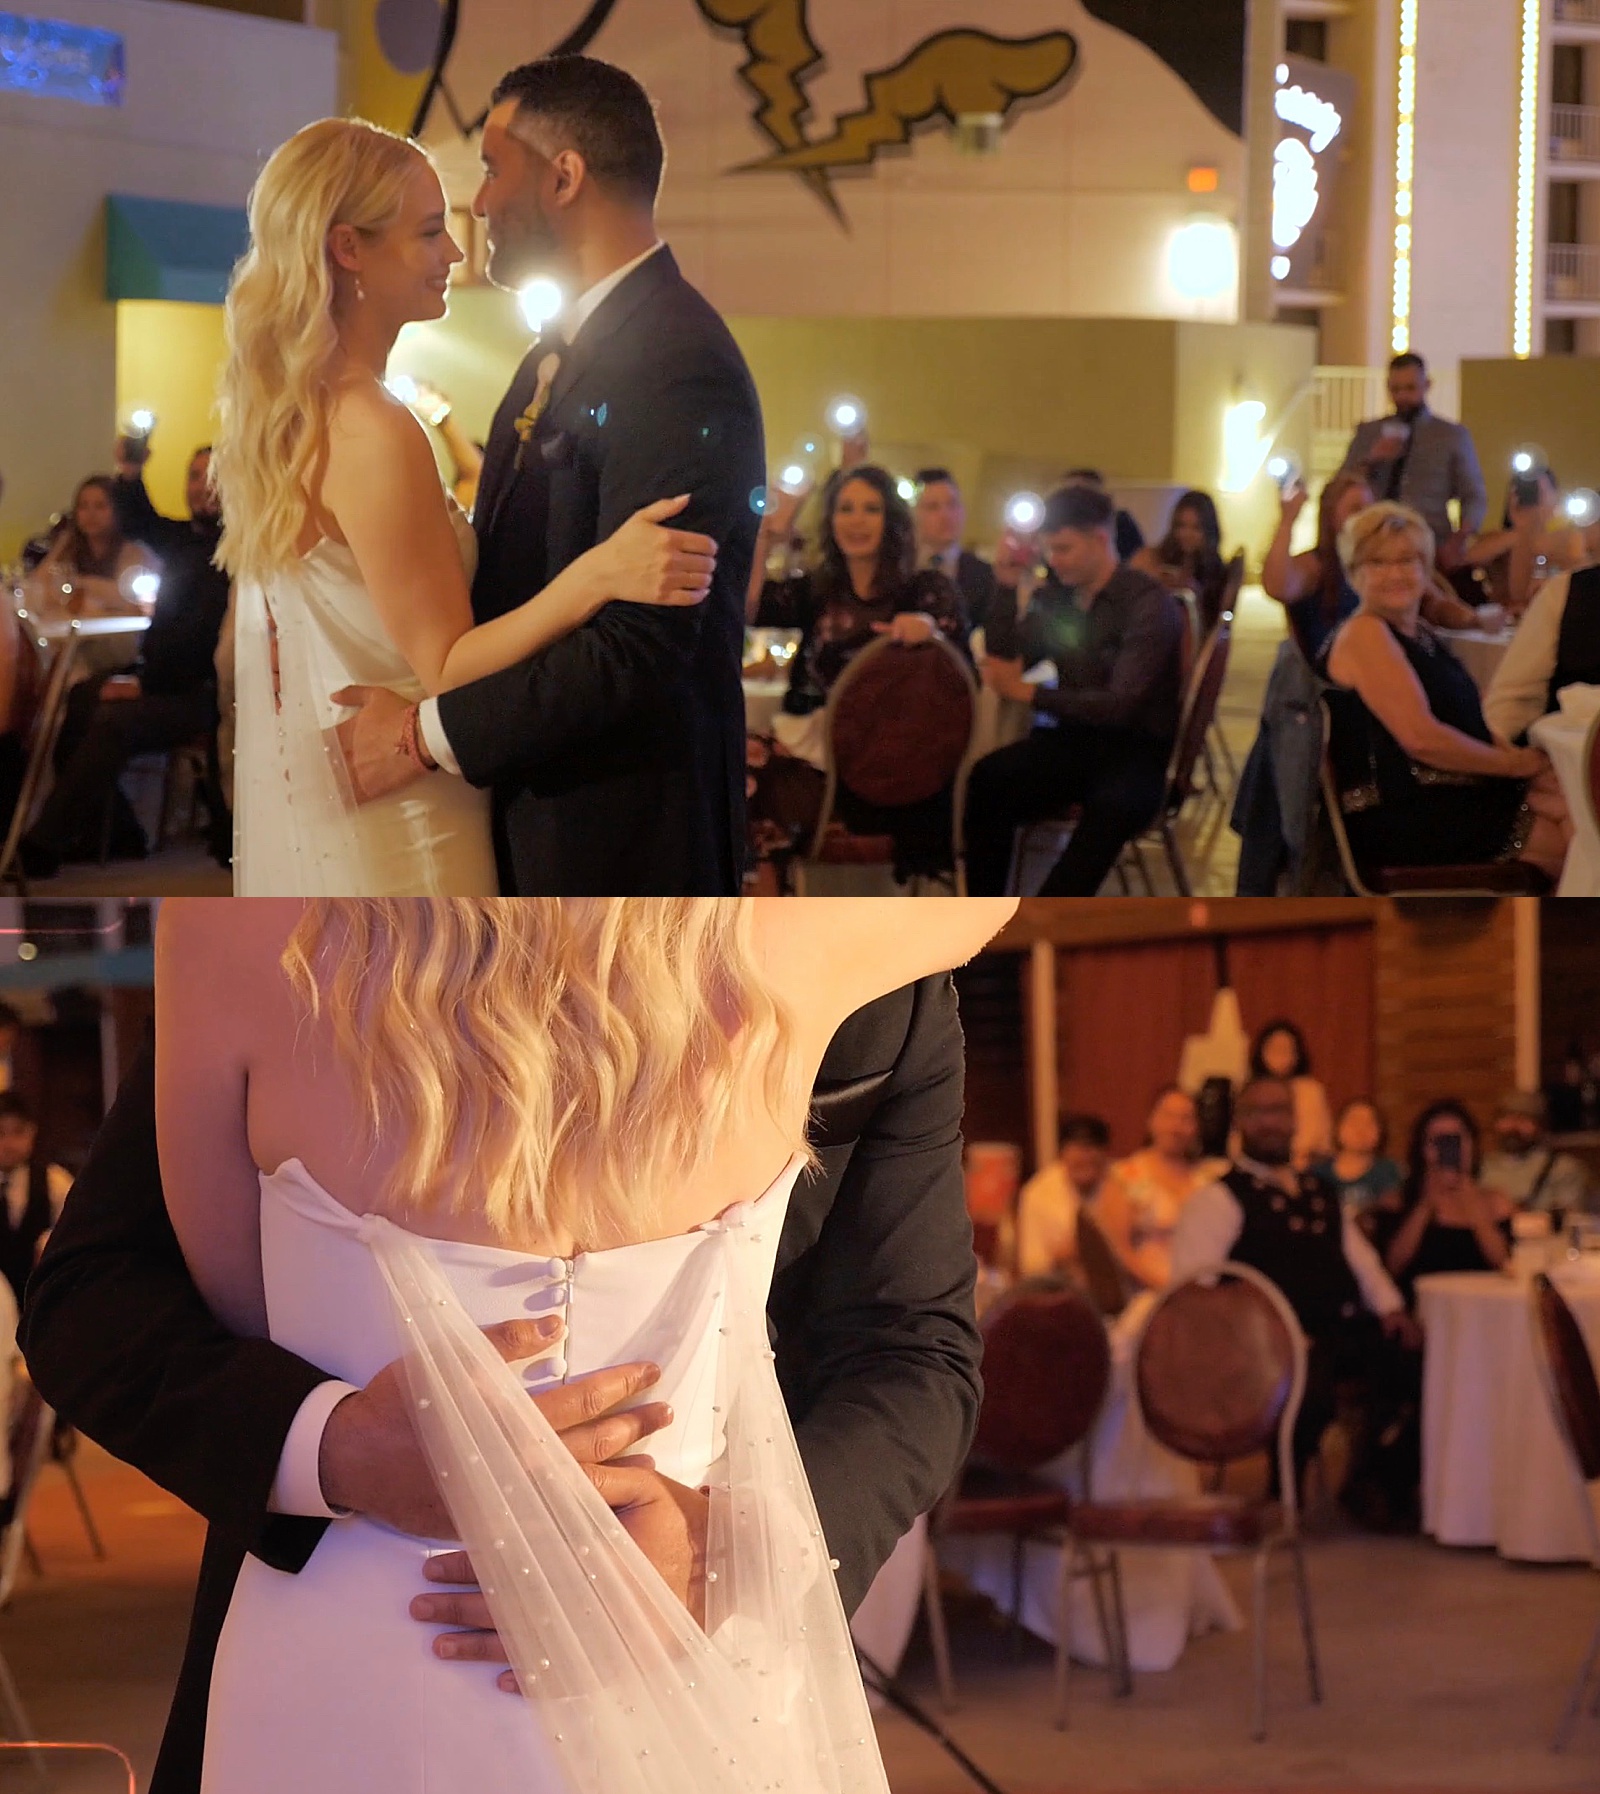 Newlyweds share a first dance at their rooftop reception.